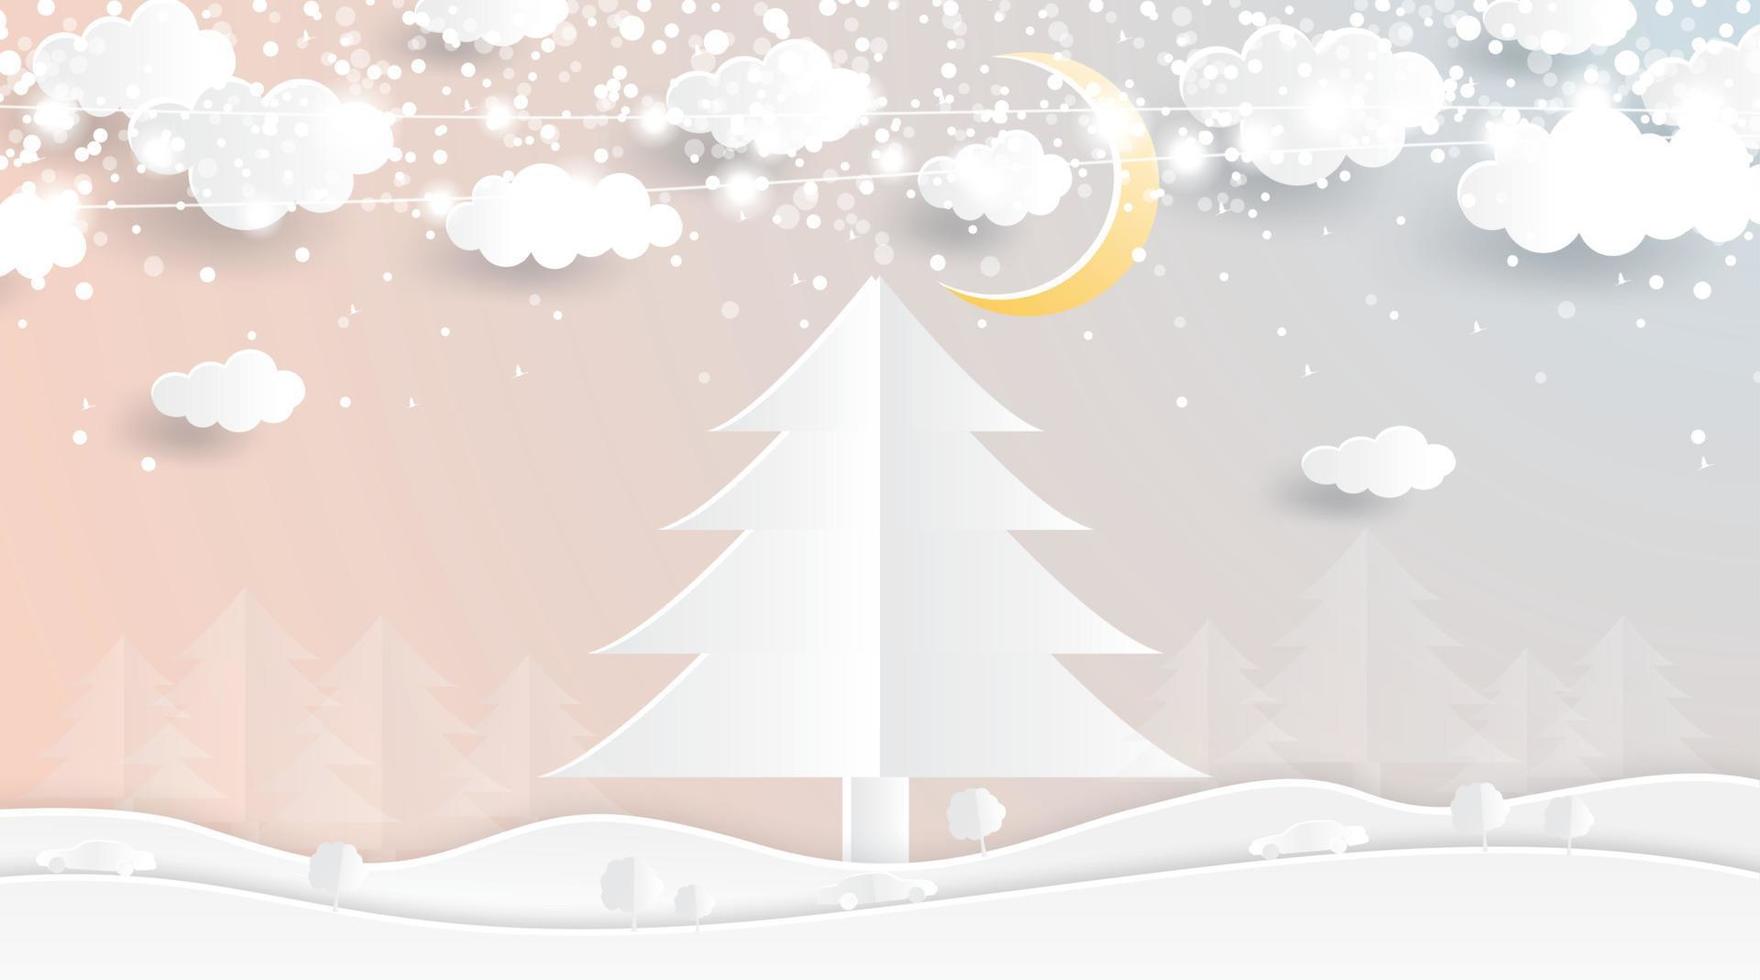 Christmas Tree in Paper Cut Style. Winter Forest with Moon and Clouds. vector